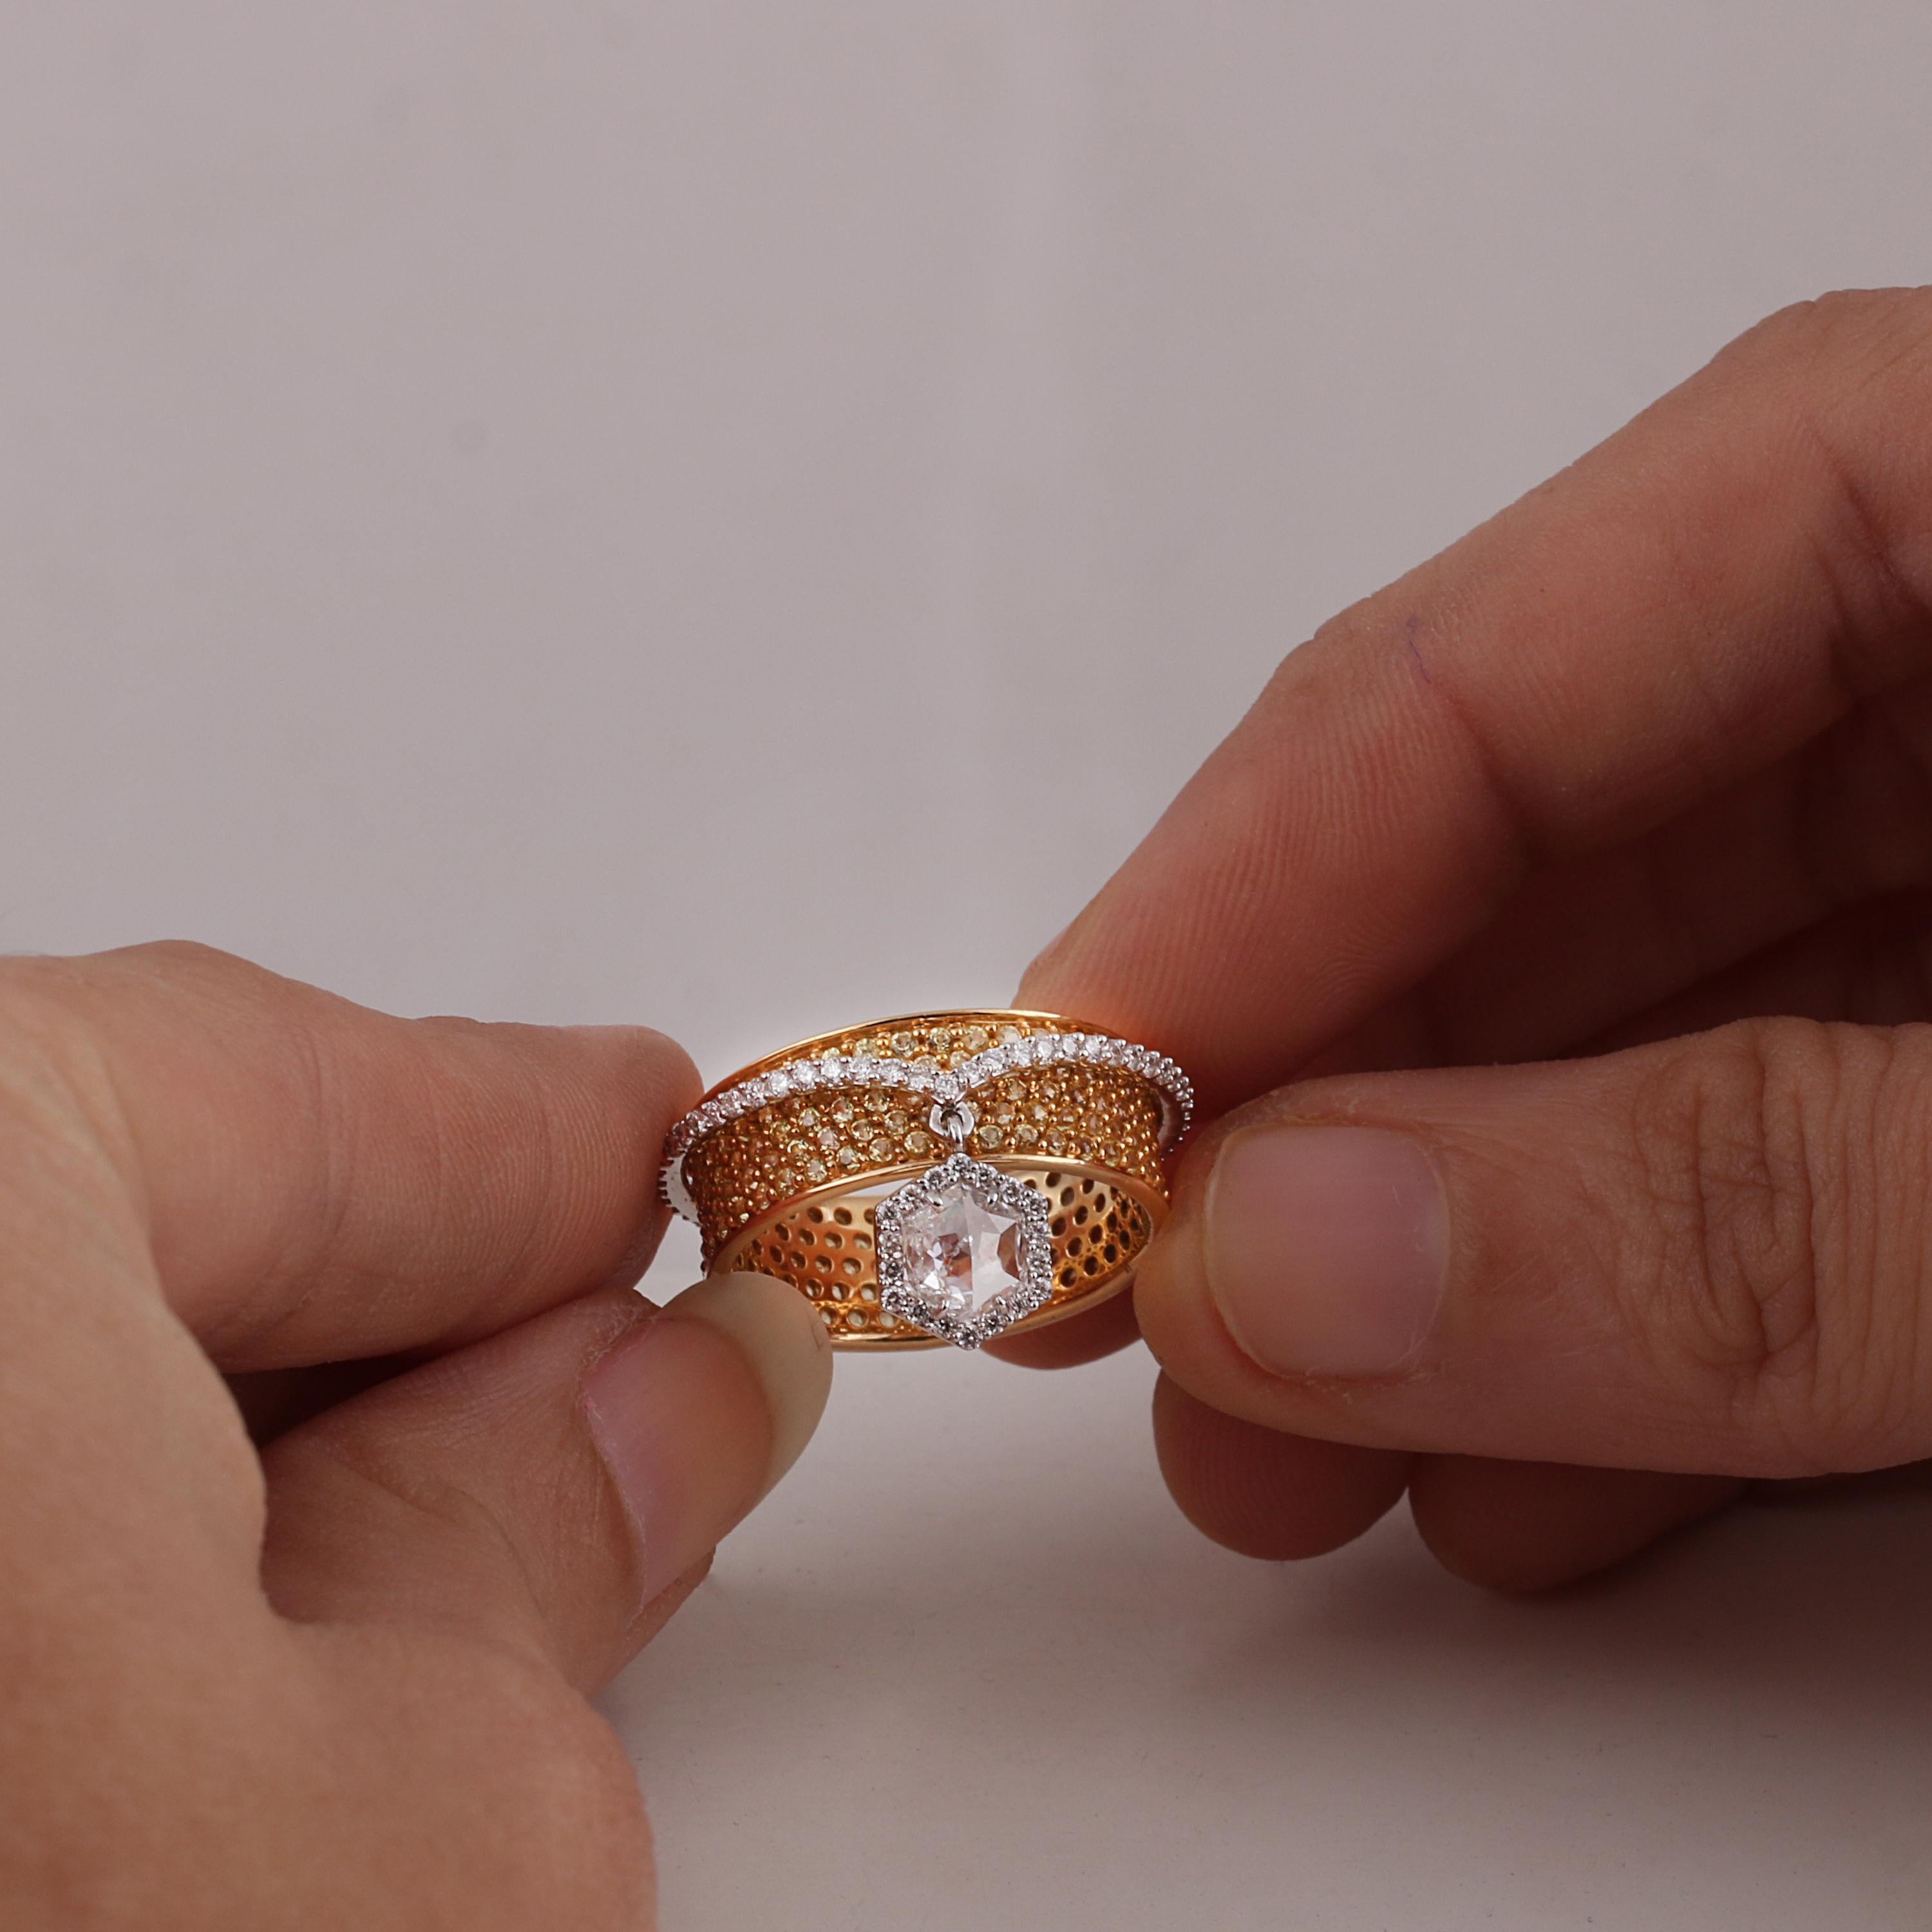 Gross Weight: 6.11 Grams
Diamond Weight: 0.82 cts
Yellow Sapphire Weight: 2.11 cts
Ring Size: US 6.25
IGI Certification can be done upon request

Video of the product can be shared upon request.

Versatility meets elegance in this 18K white and